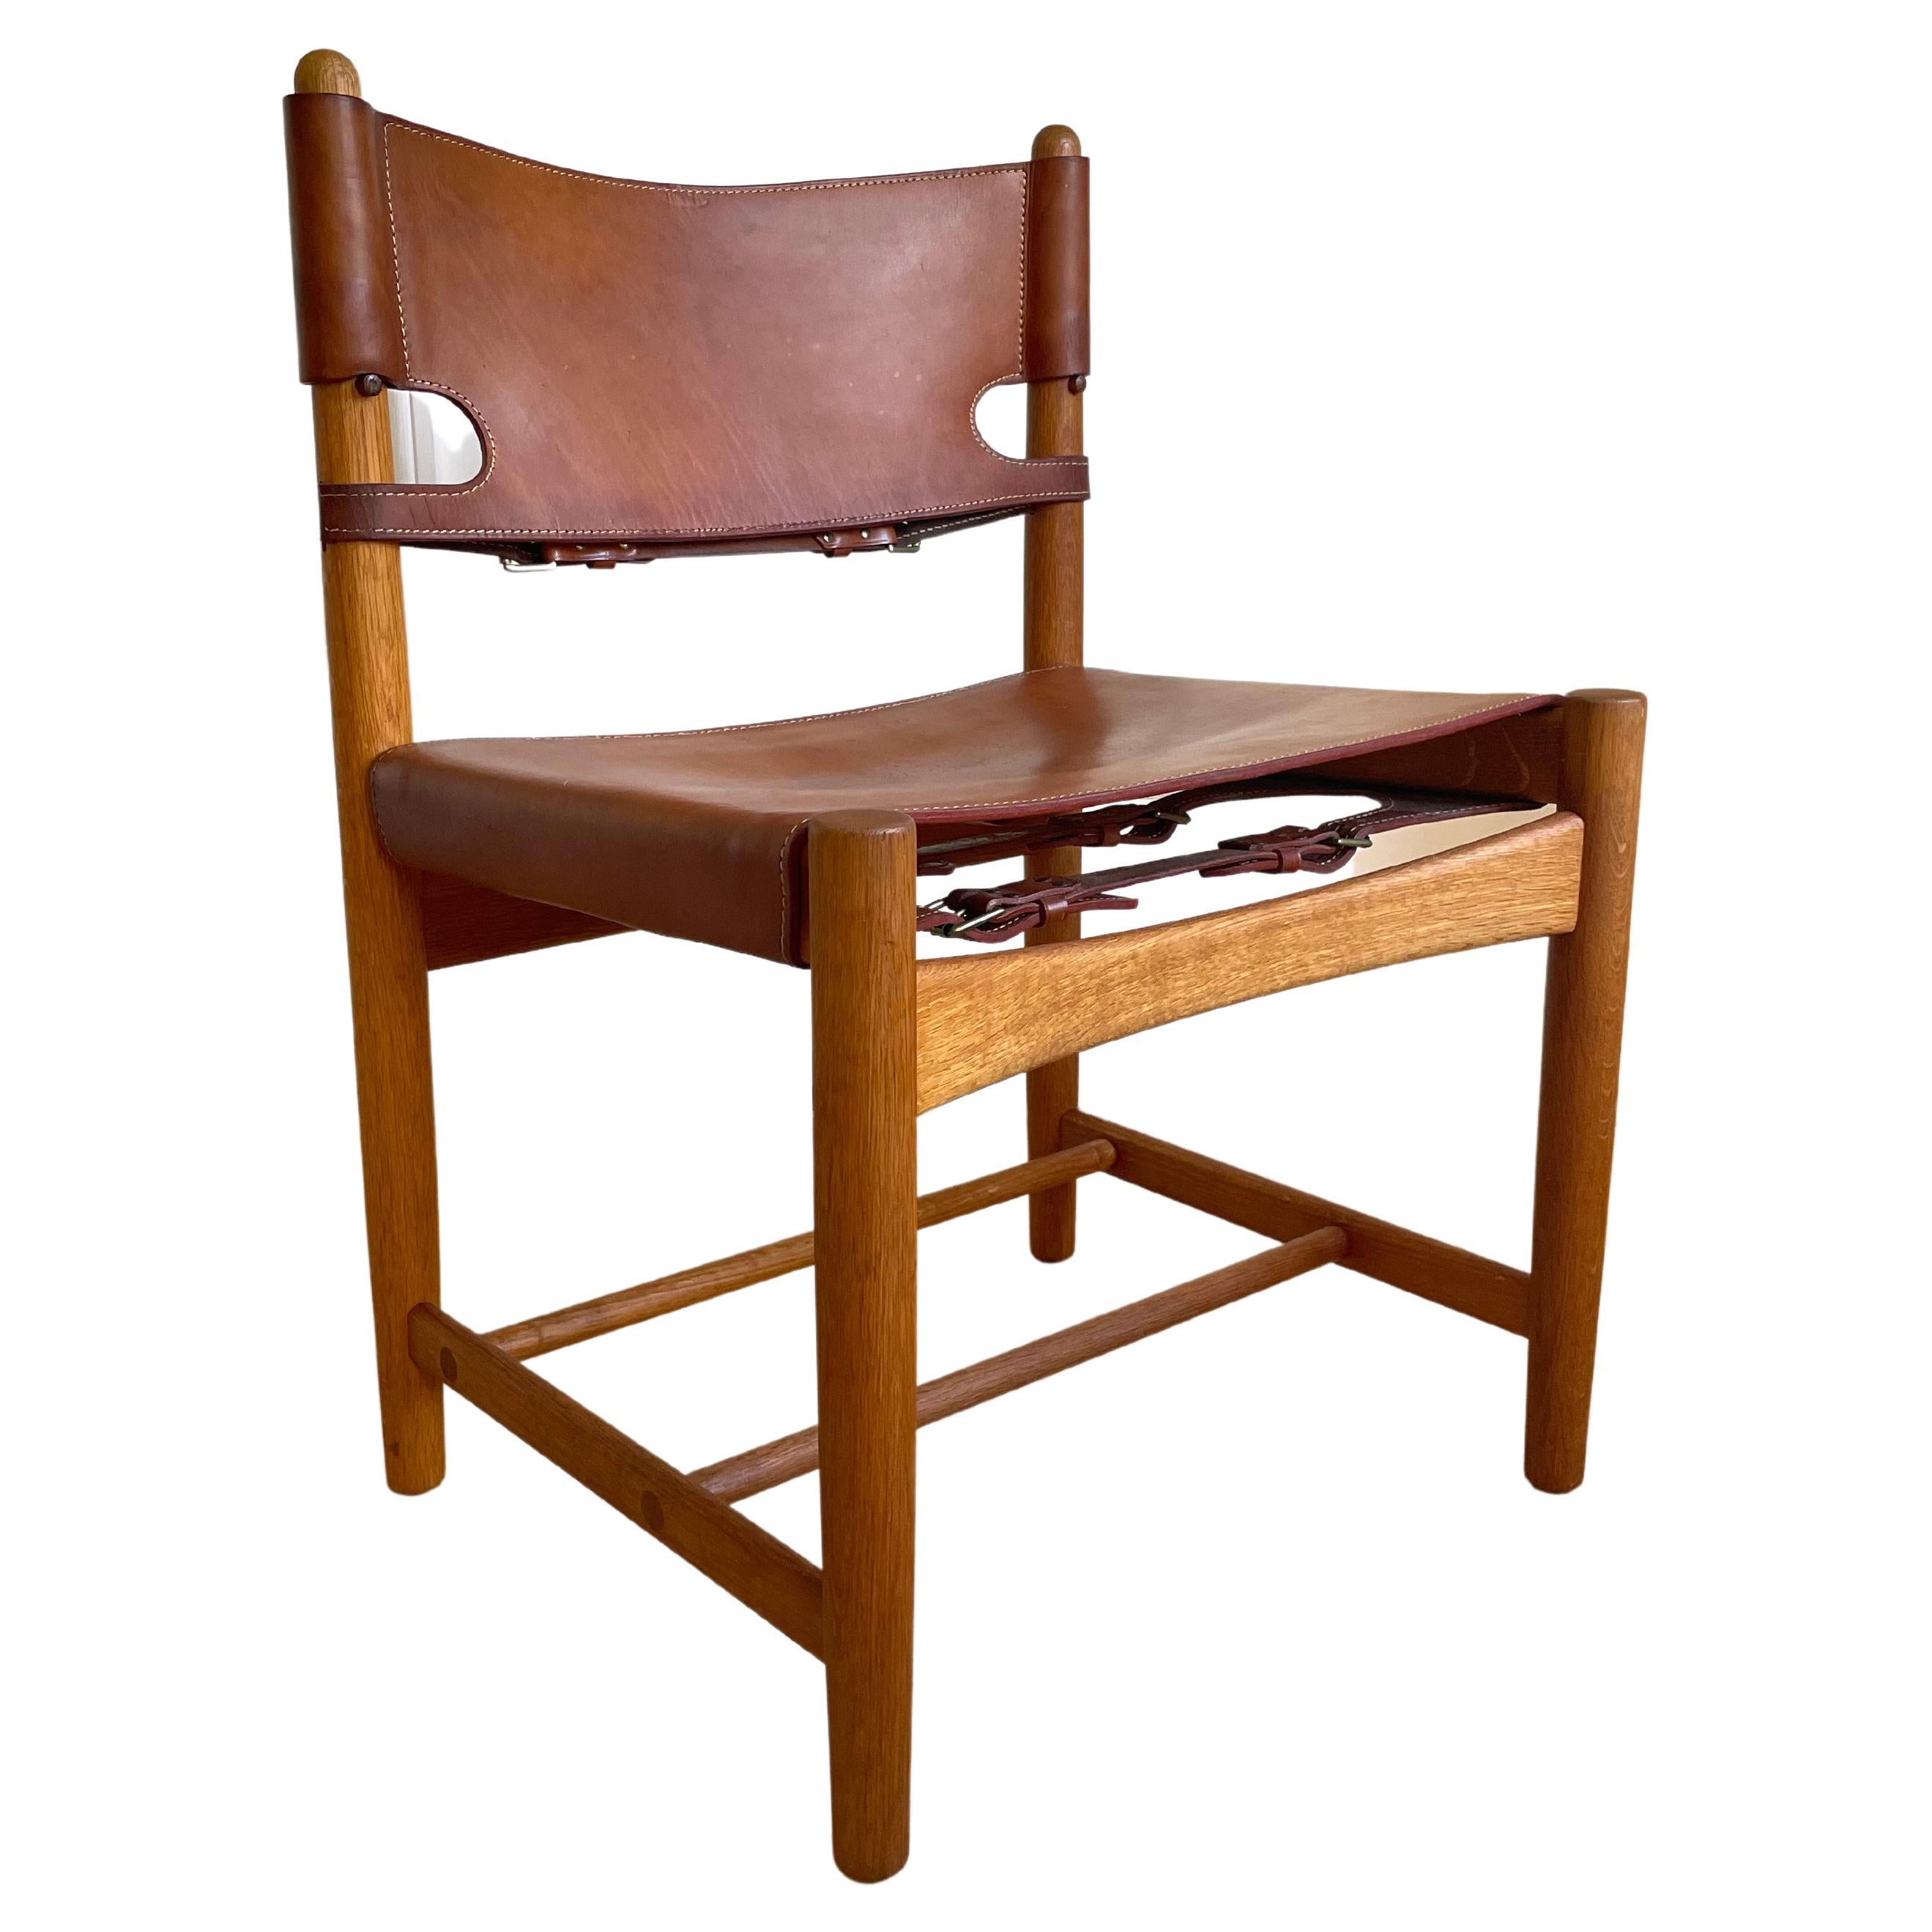 Original midcentury design icon. The Spanish dining chair from the early production years in the mid 1960s. The Danish Børge Mogensen oak wood classic with thick cognac saddle leather carefully cared for over the years and in beautiful vintage